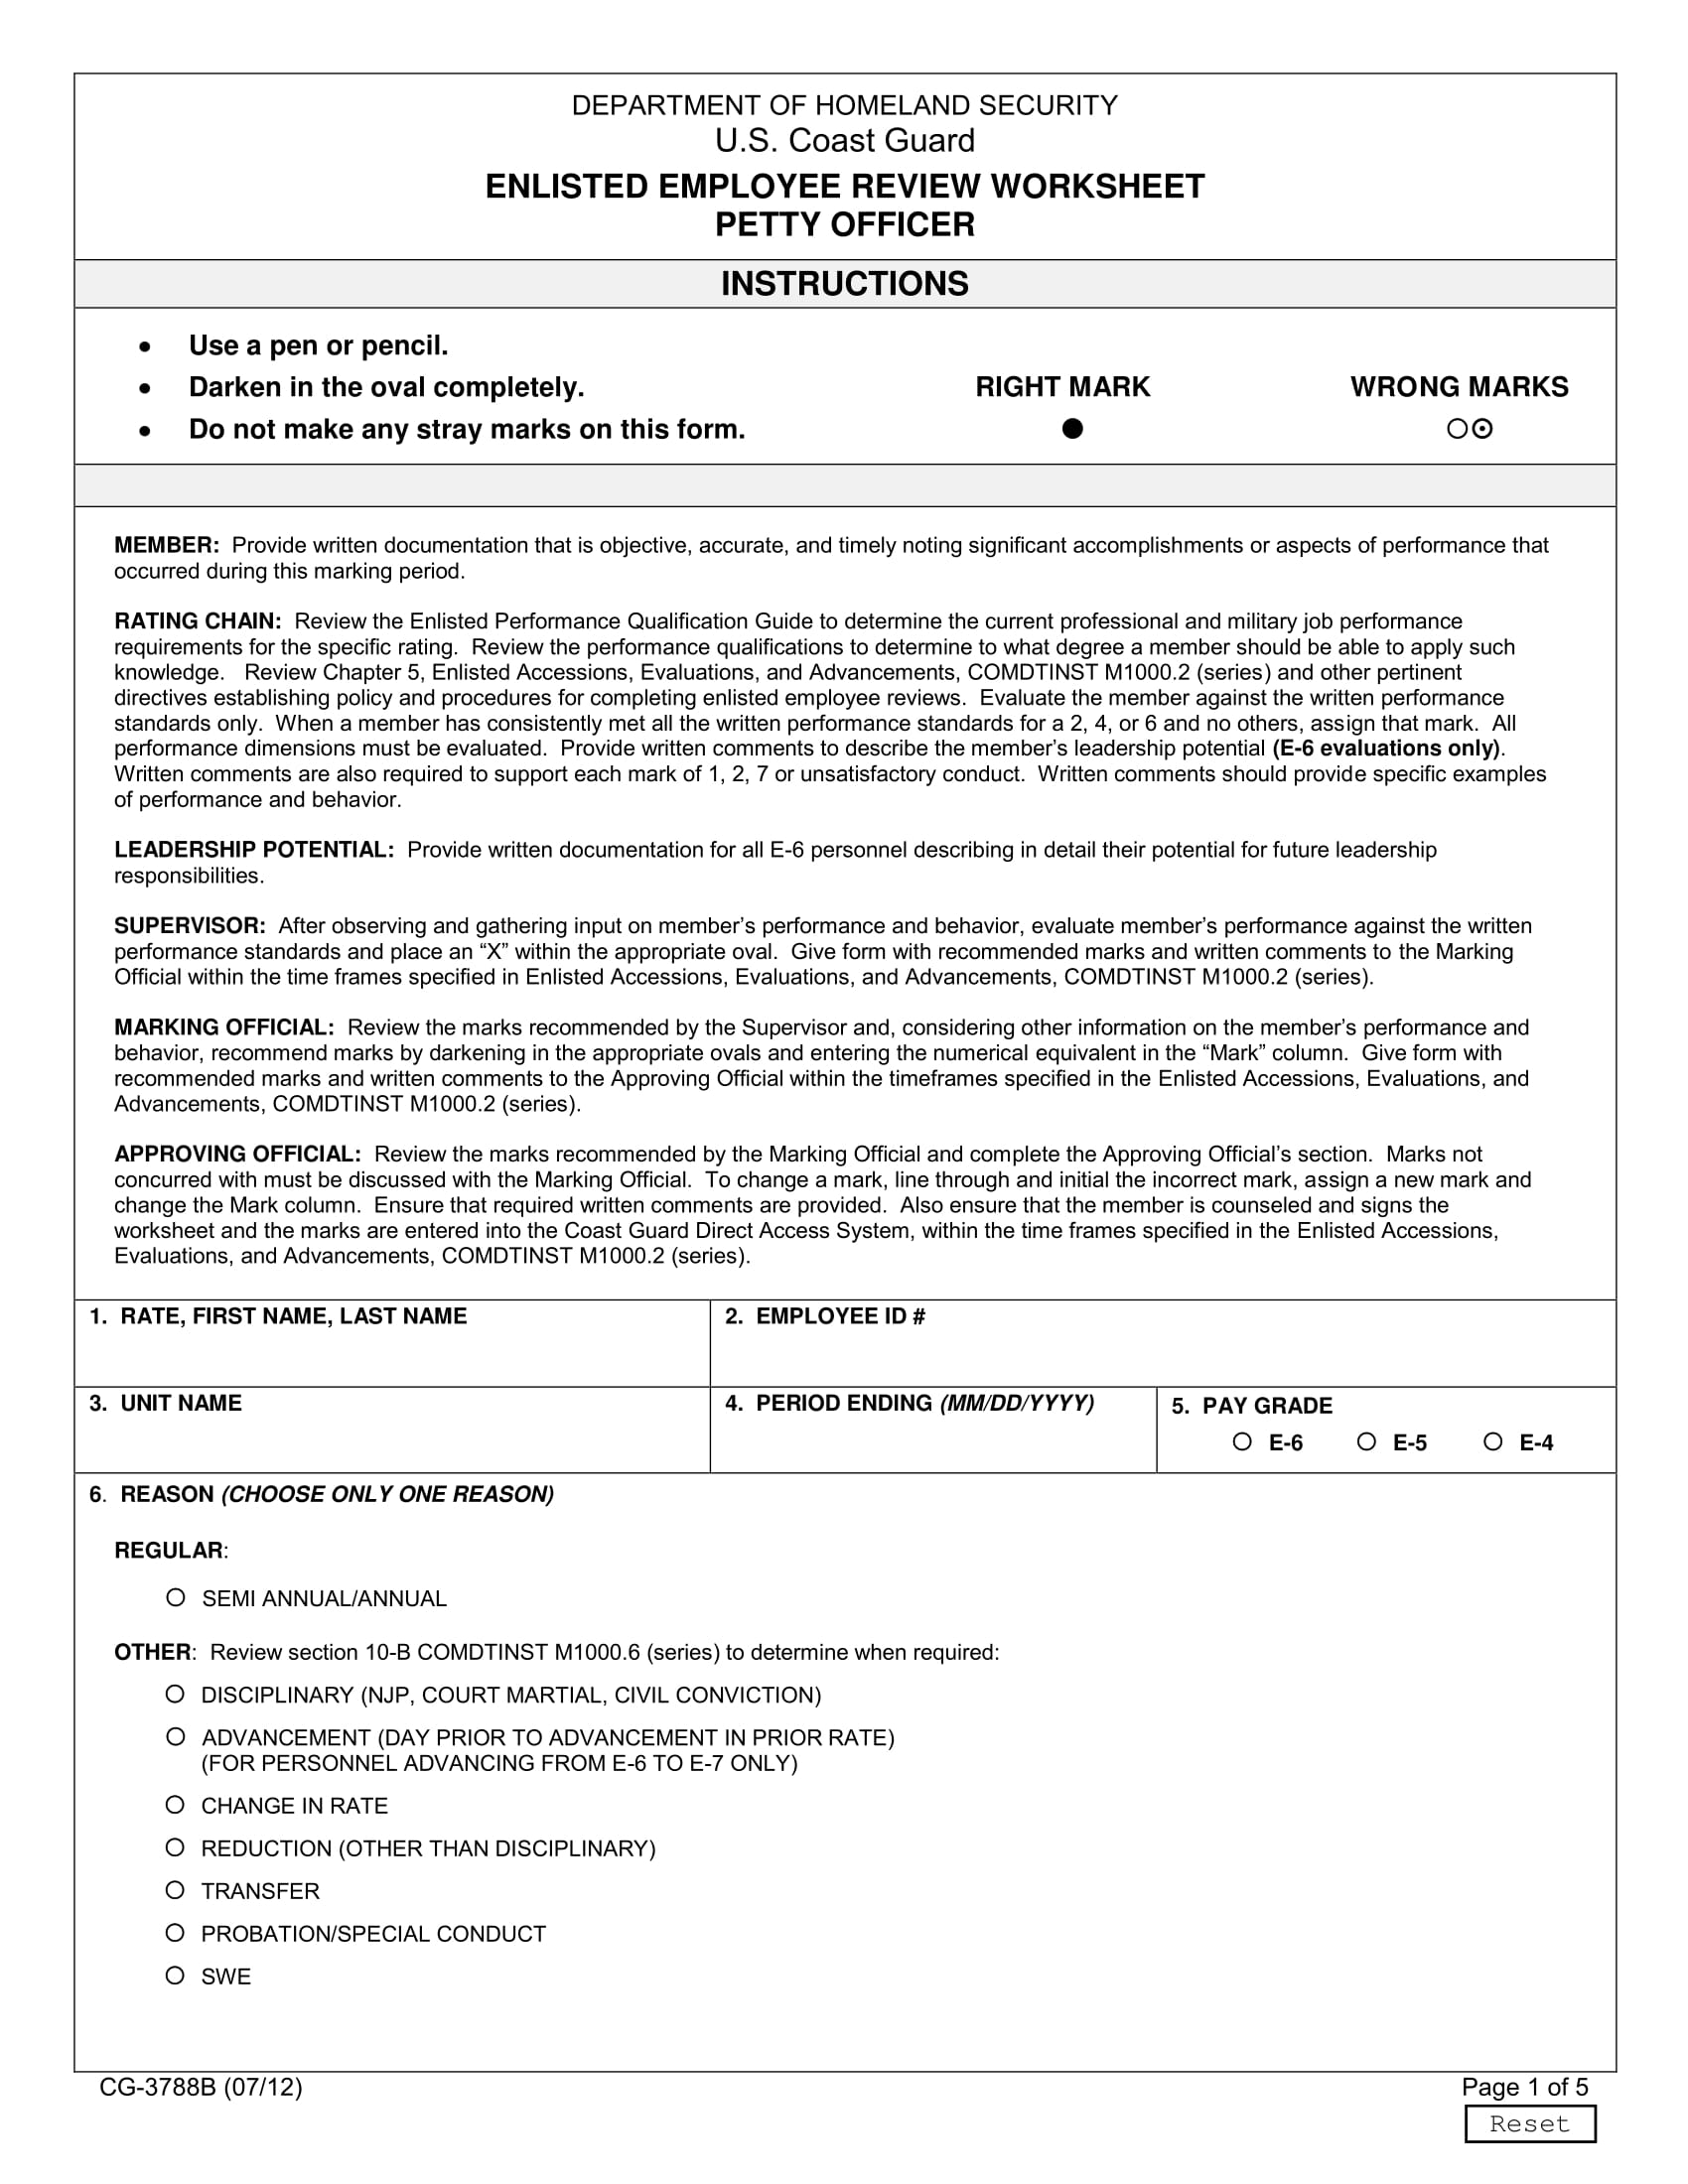 enlisted employee review form 1